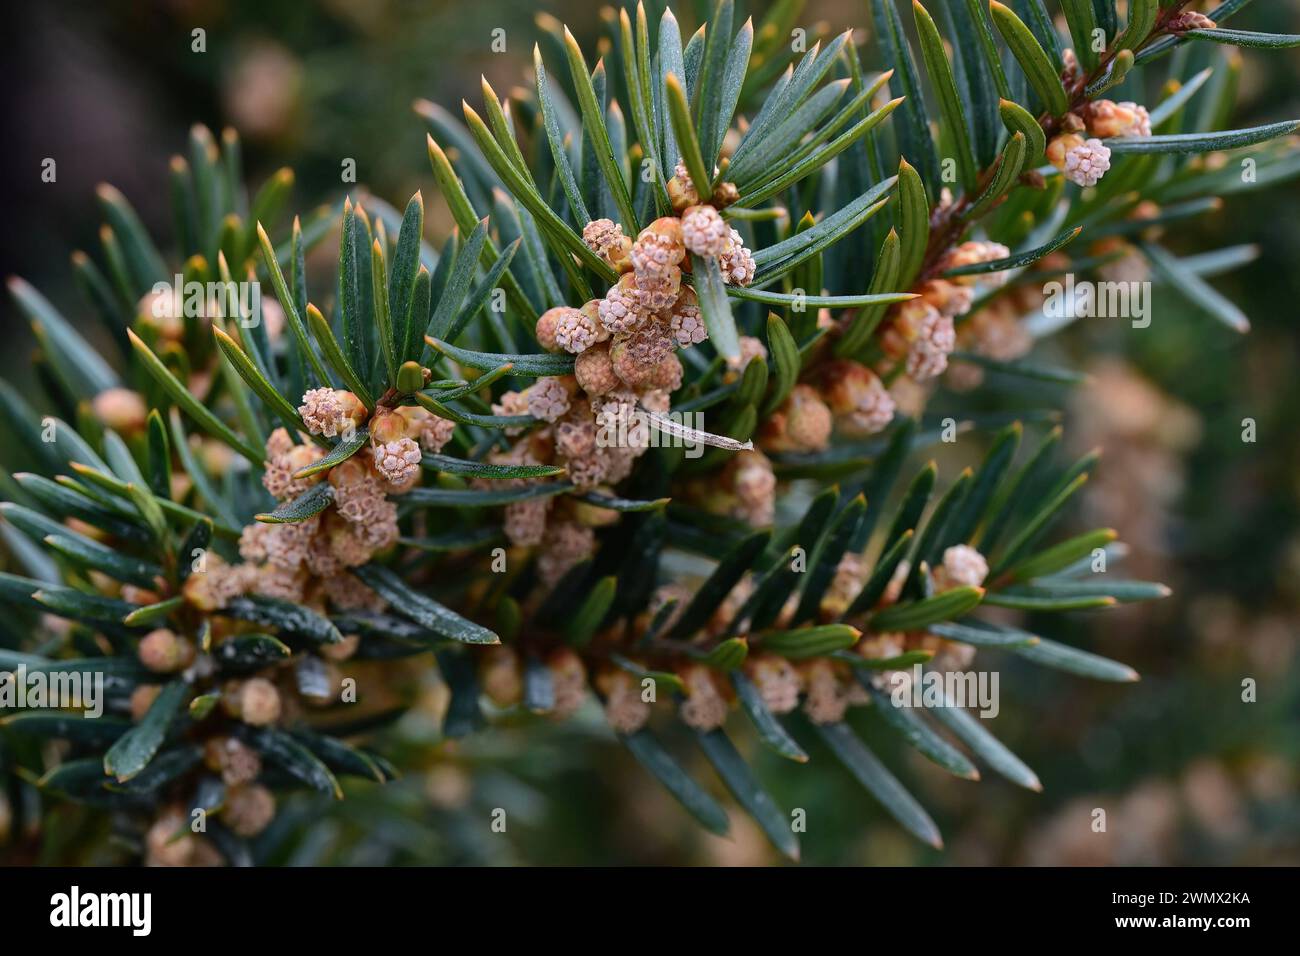 A close-up of Taxus cuspidata, also known as Spreading Yew or Japanese Yew Stock Photo